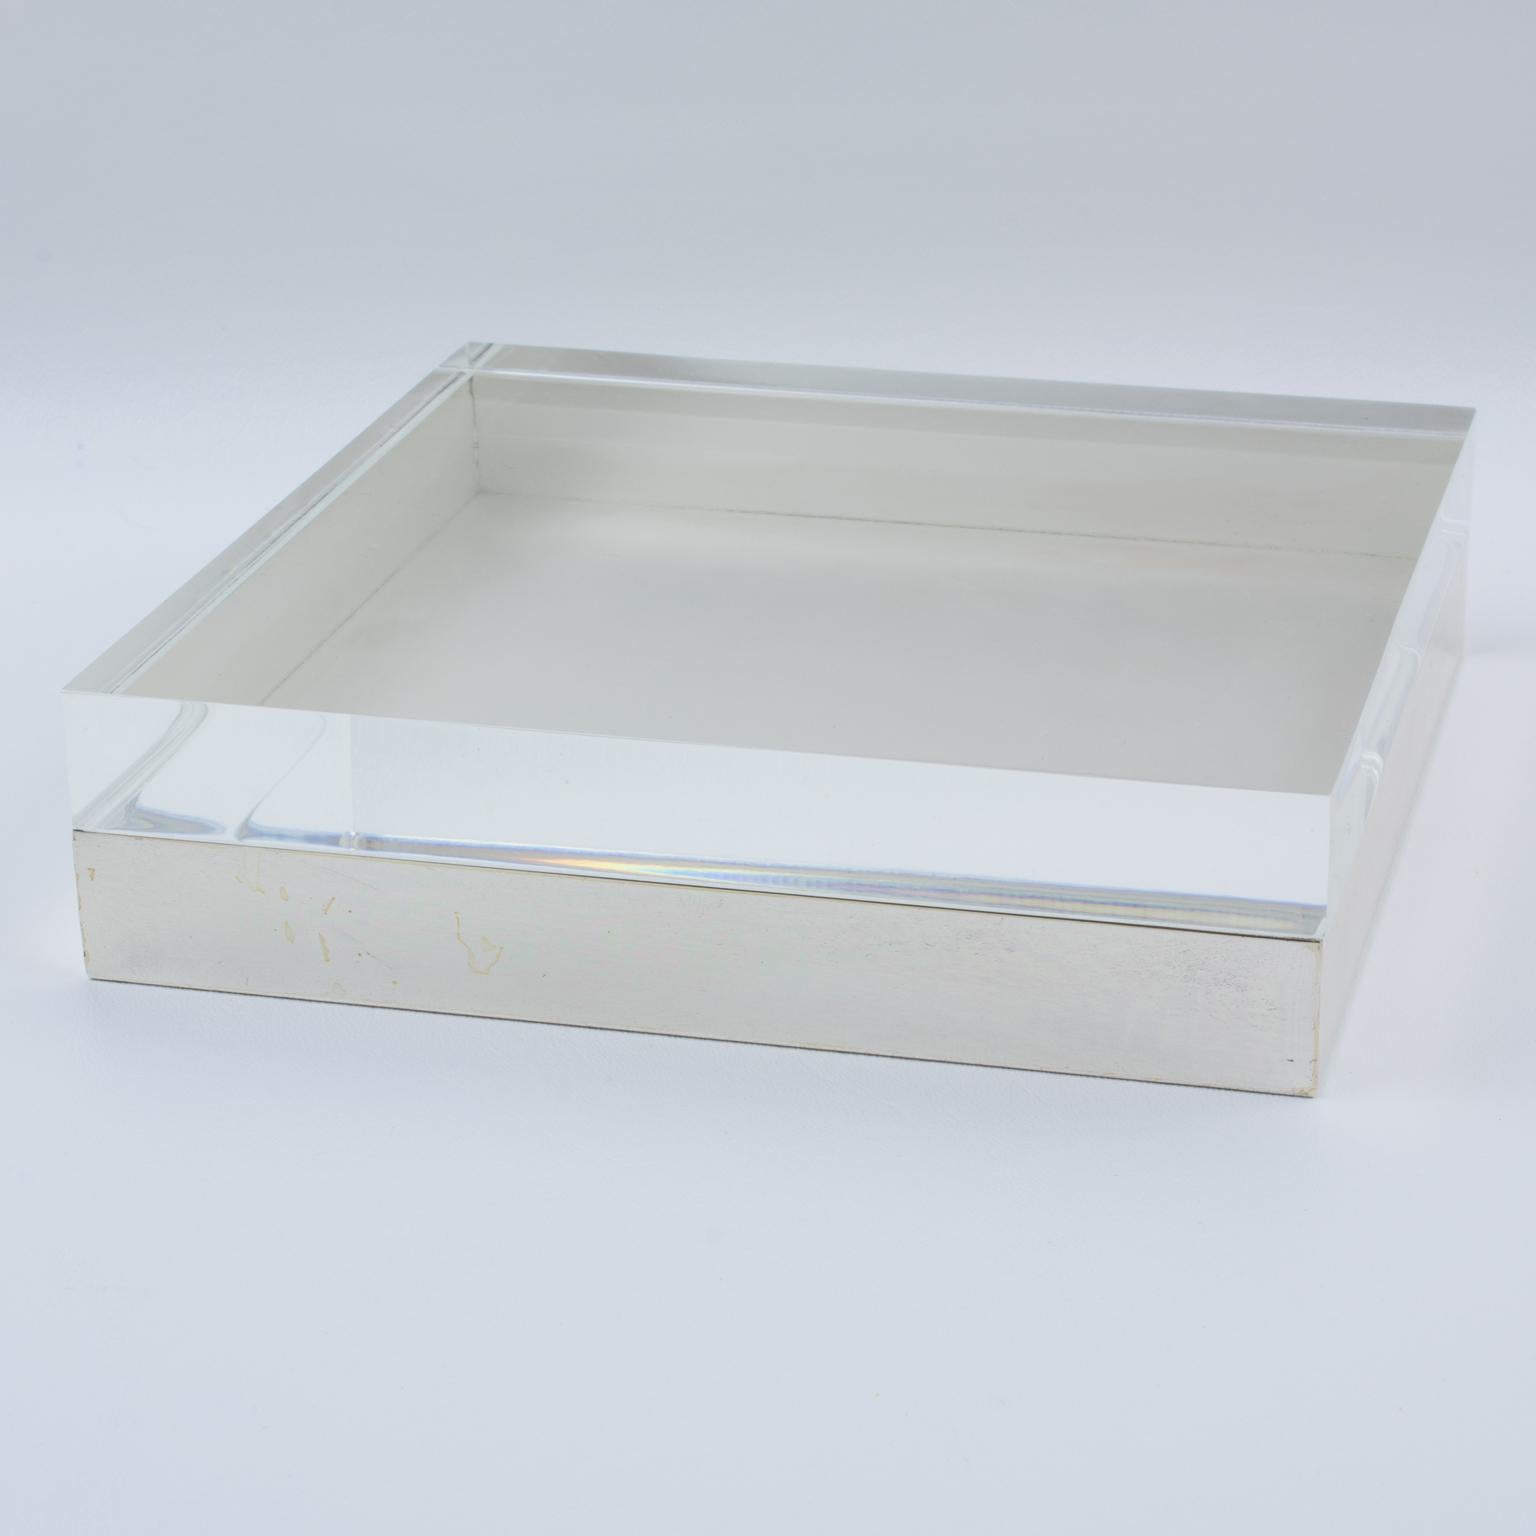 The massive geometric shape boasts a silver plate metal base and a thick crystal clear Lucite lid. There is no visible maker's mark.
The box is in good condition, with minor wear on the metal, but It does not significantly affect the overall